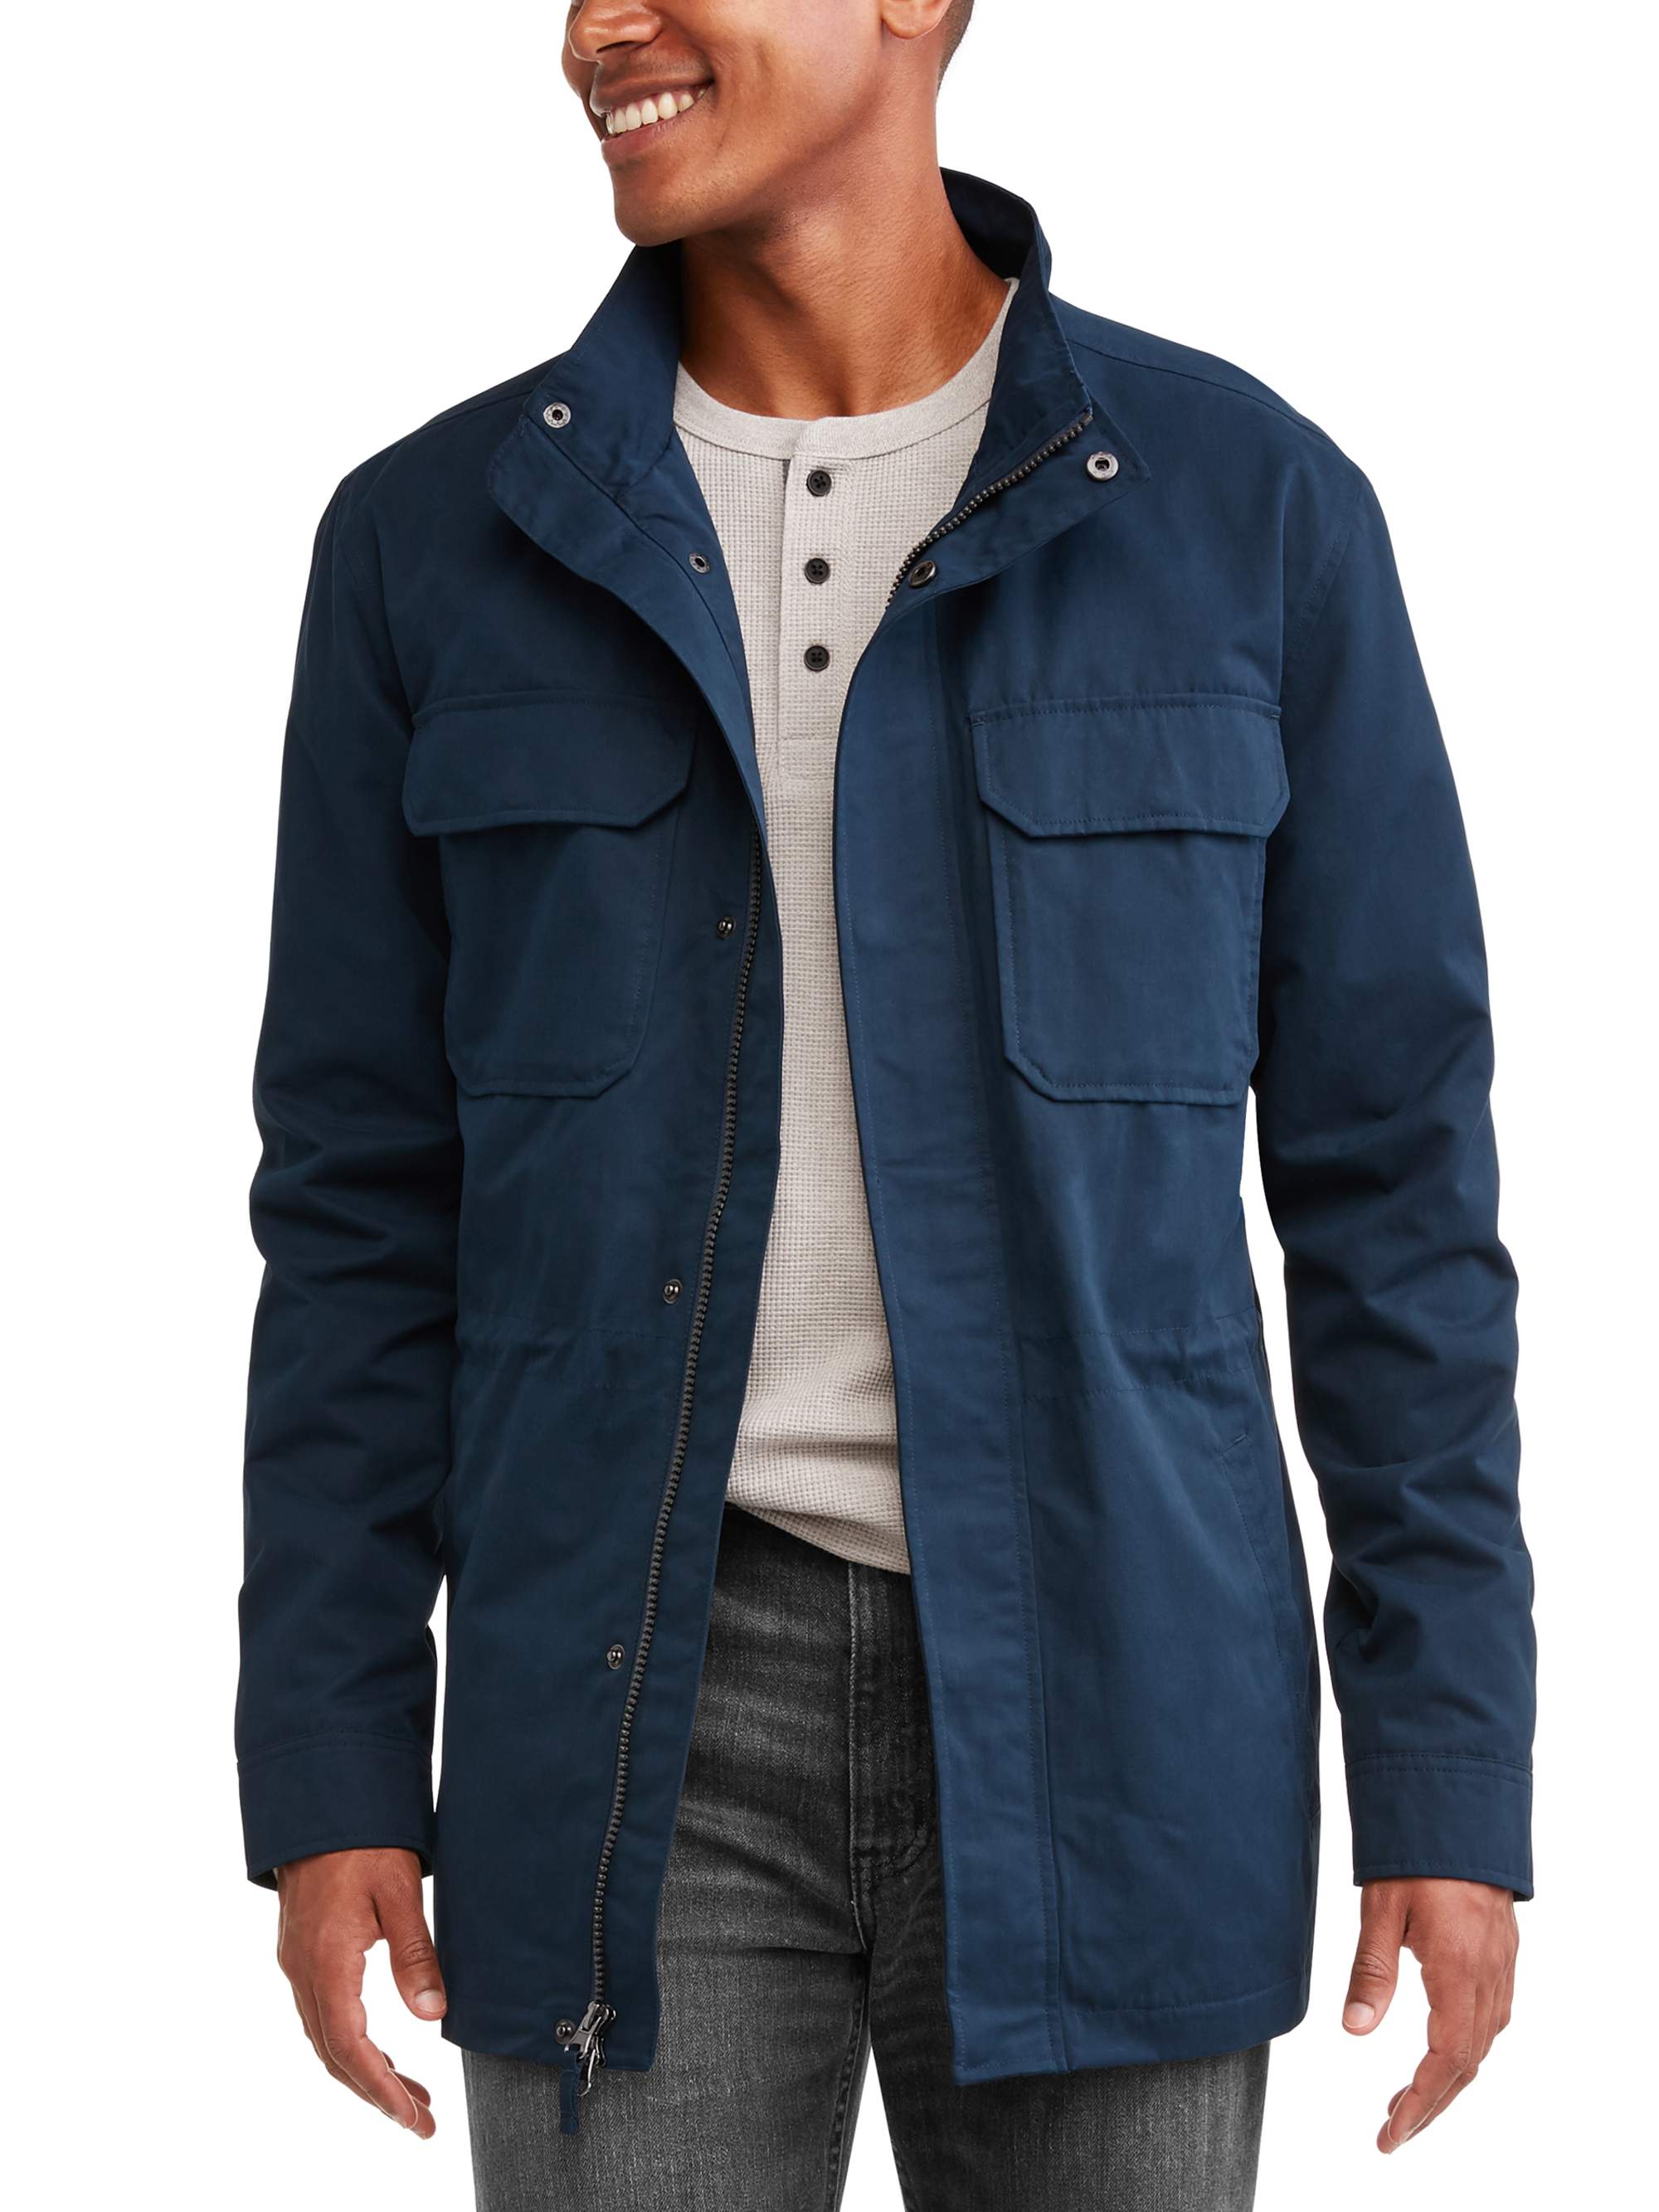 George Men's field jacket up to size 5xl - image 1 of 5